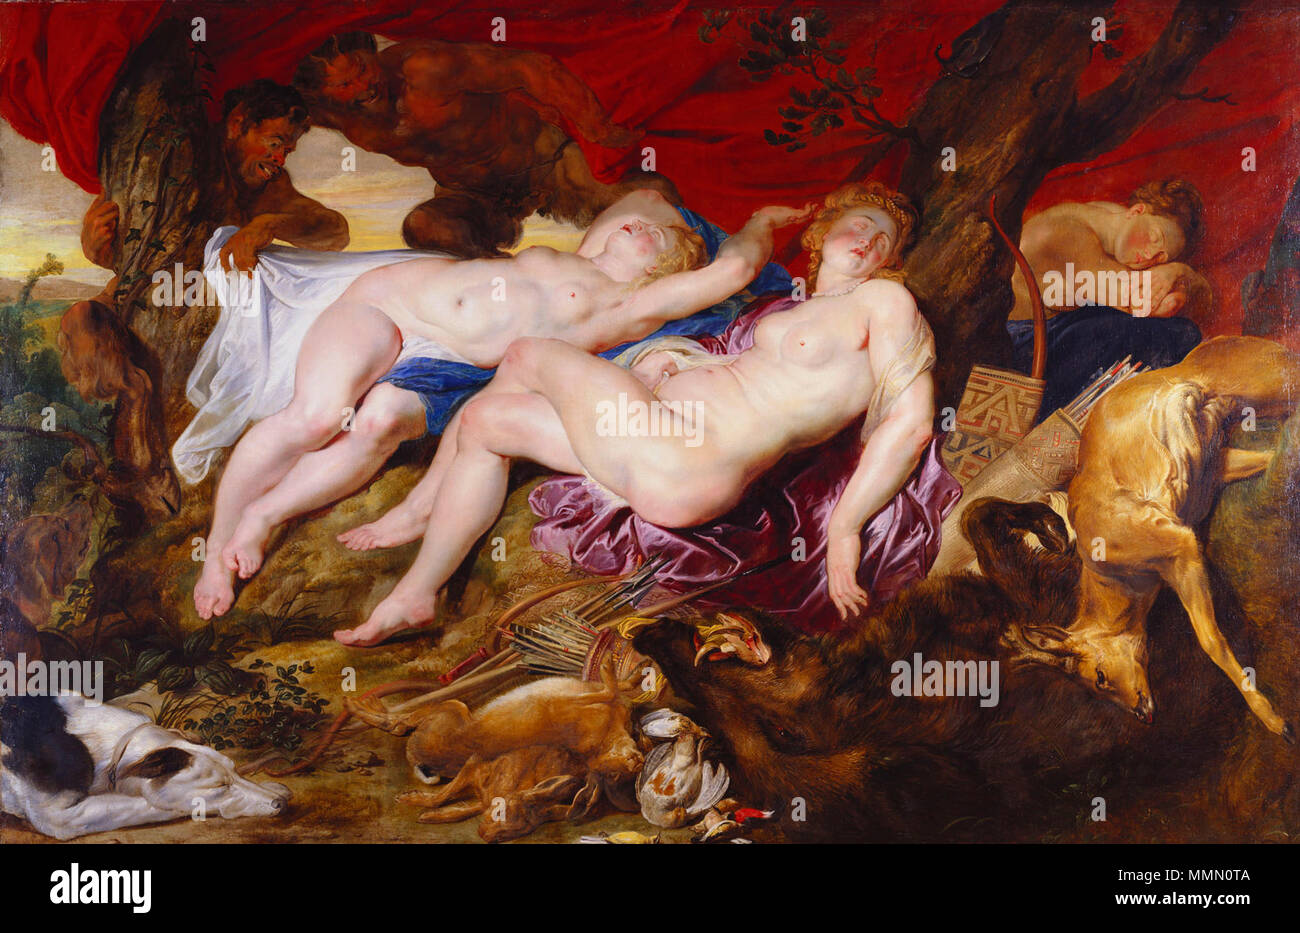 Diana and her nymphs spied upon by satyrs, by Peter Paul Rubens English: Diana and her nymphs spied upon by satyrs . circa 1616. Diana and her nymphs spied upon by satyrs, by Peter Paul Rubens Stock Photo